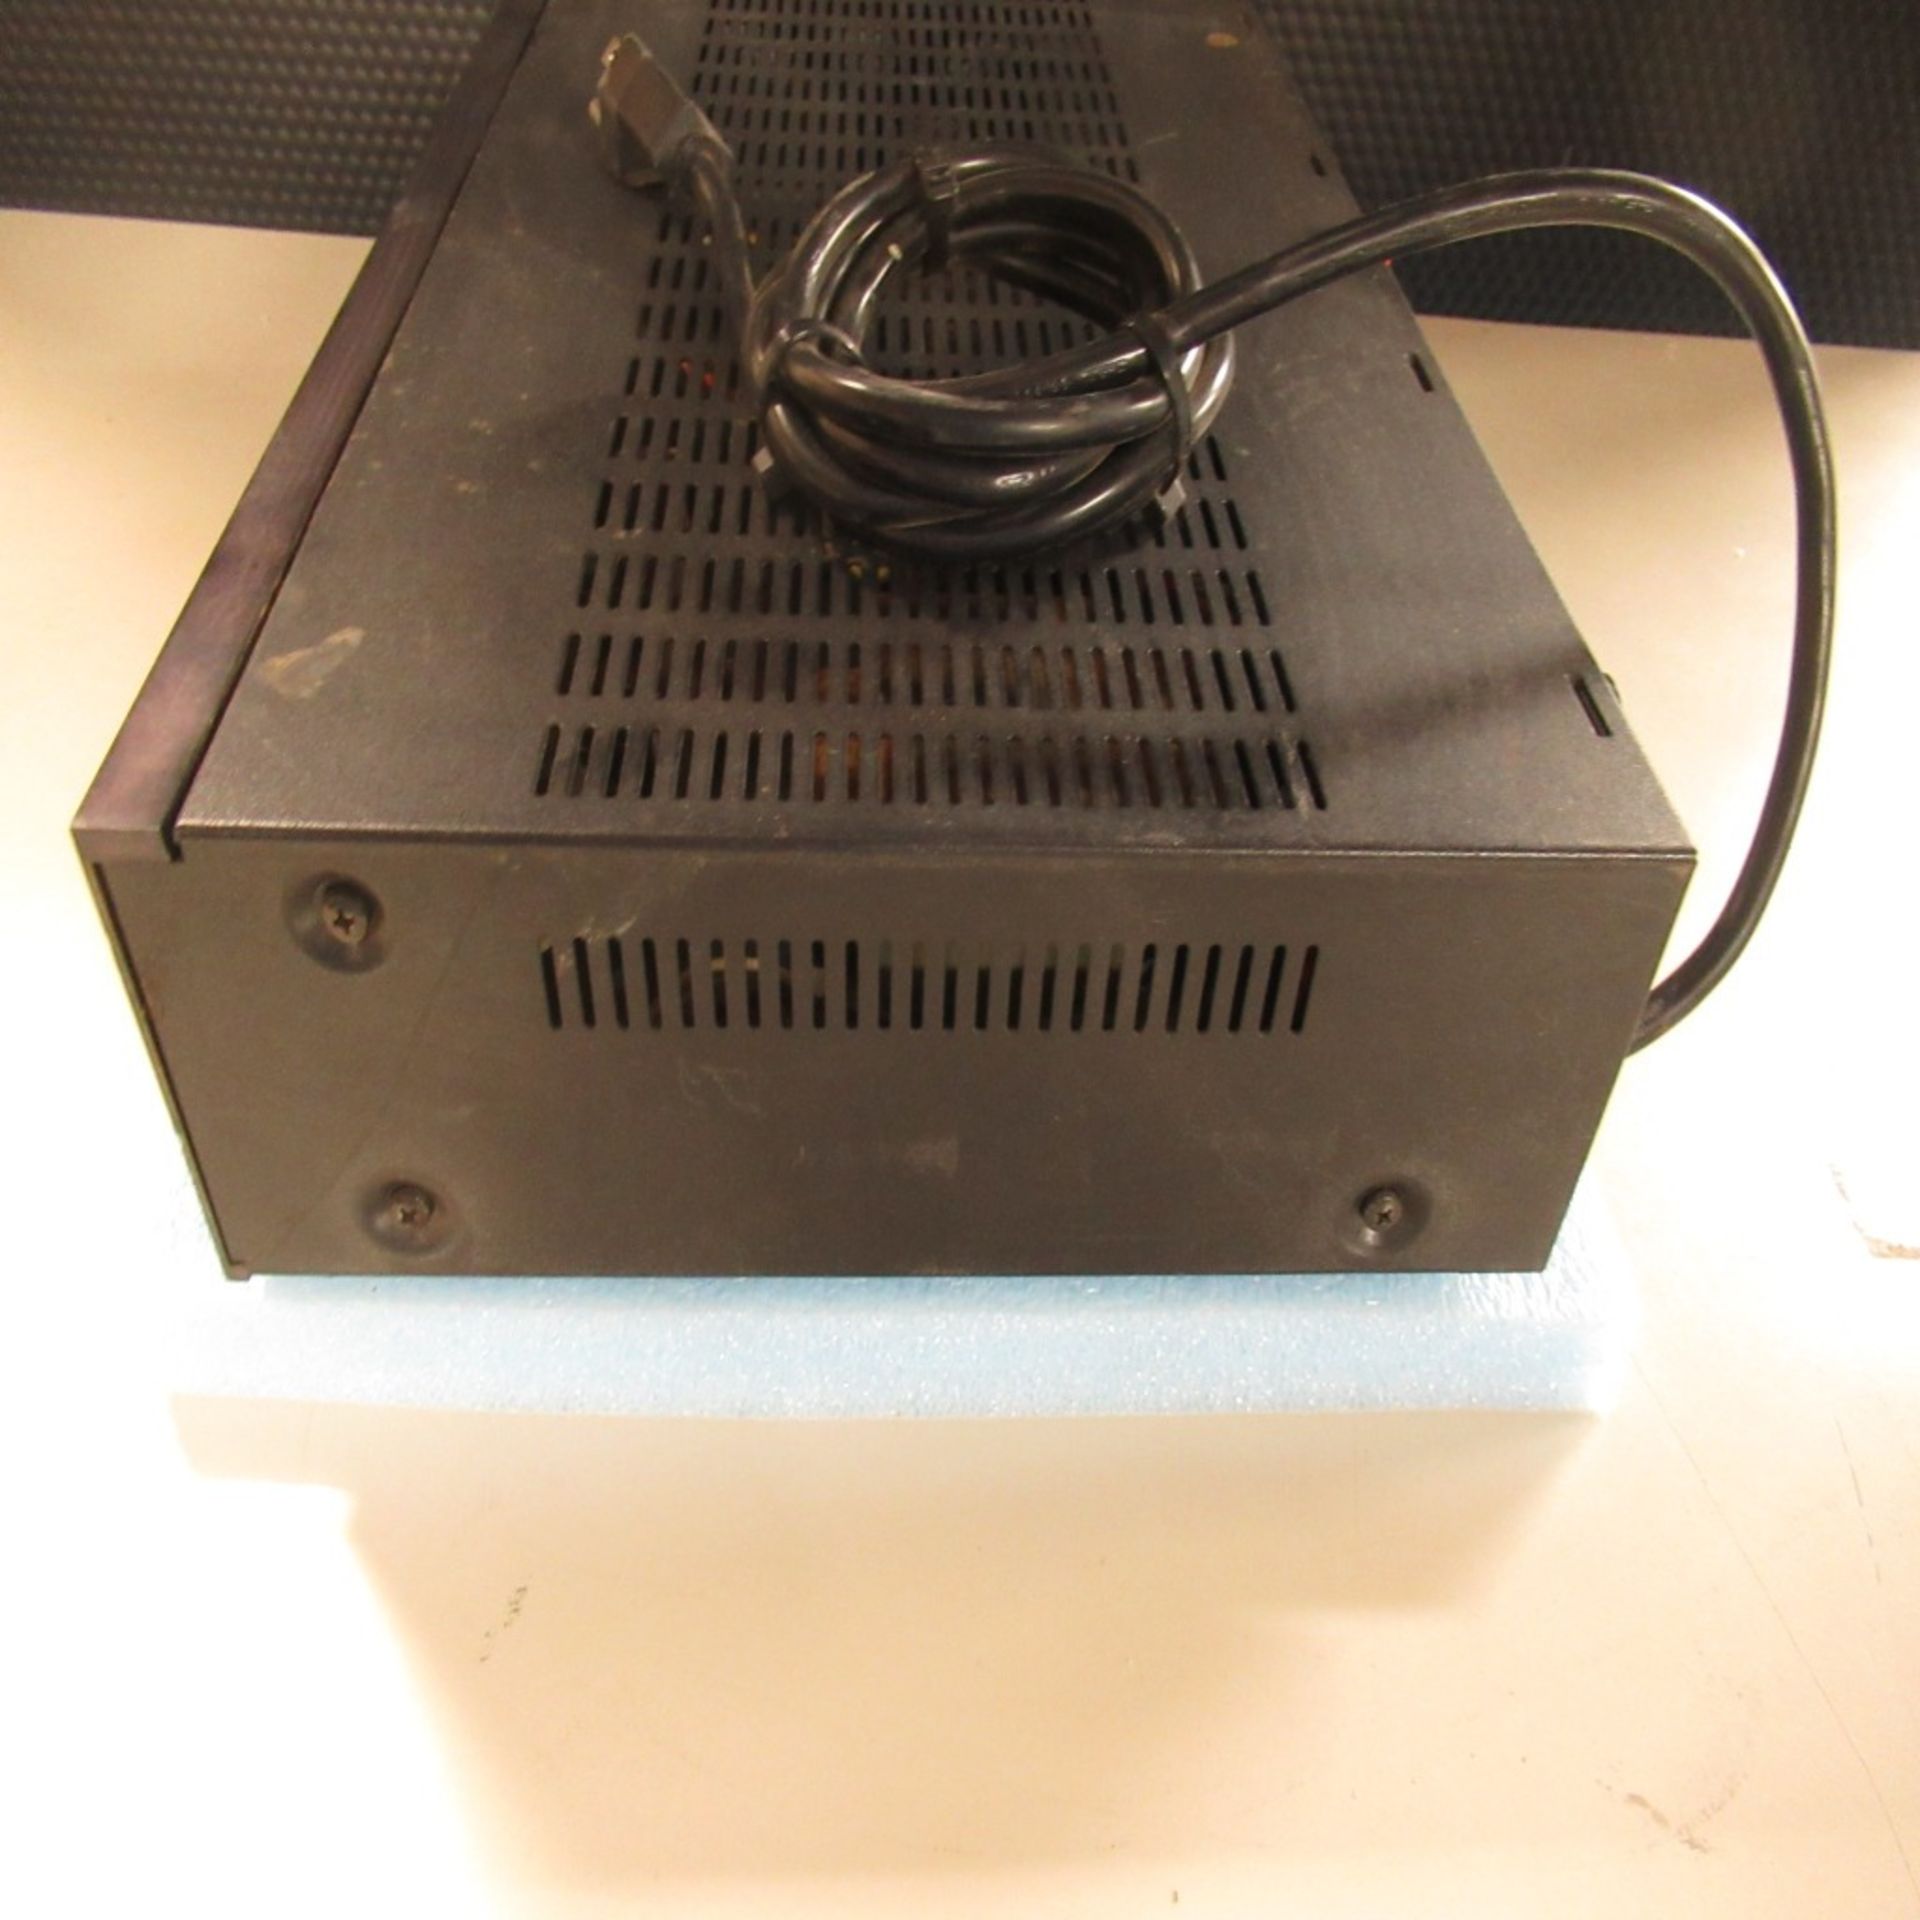 PHOTON SNAP SHOT MODEL 6000 *POWERS ON* NO SCREEN DISPLAY; FARNELL AP20-80 REGULATED POWER SUPPLY * - Image 135 of 222